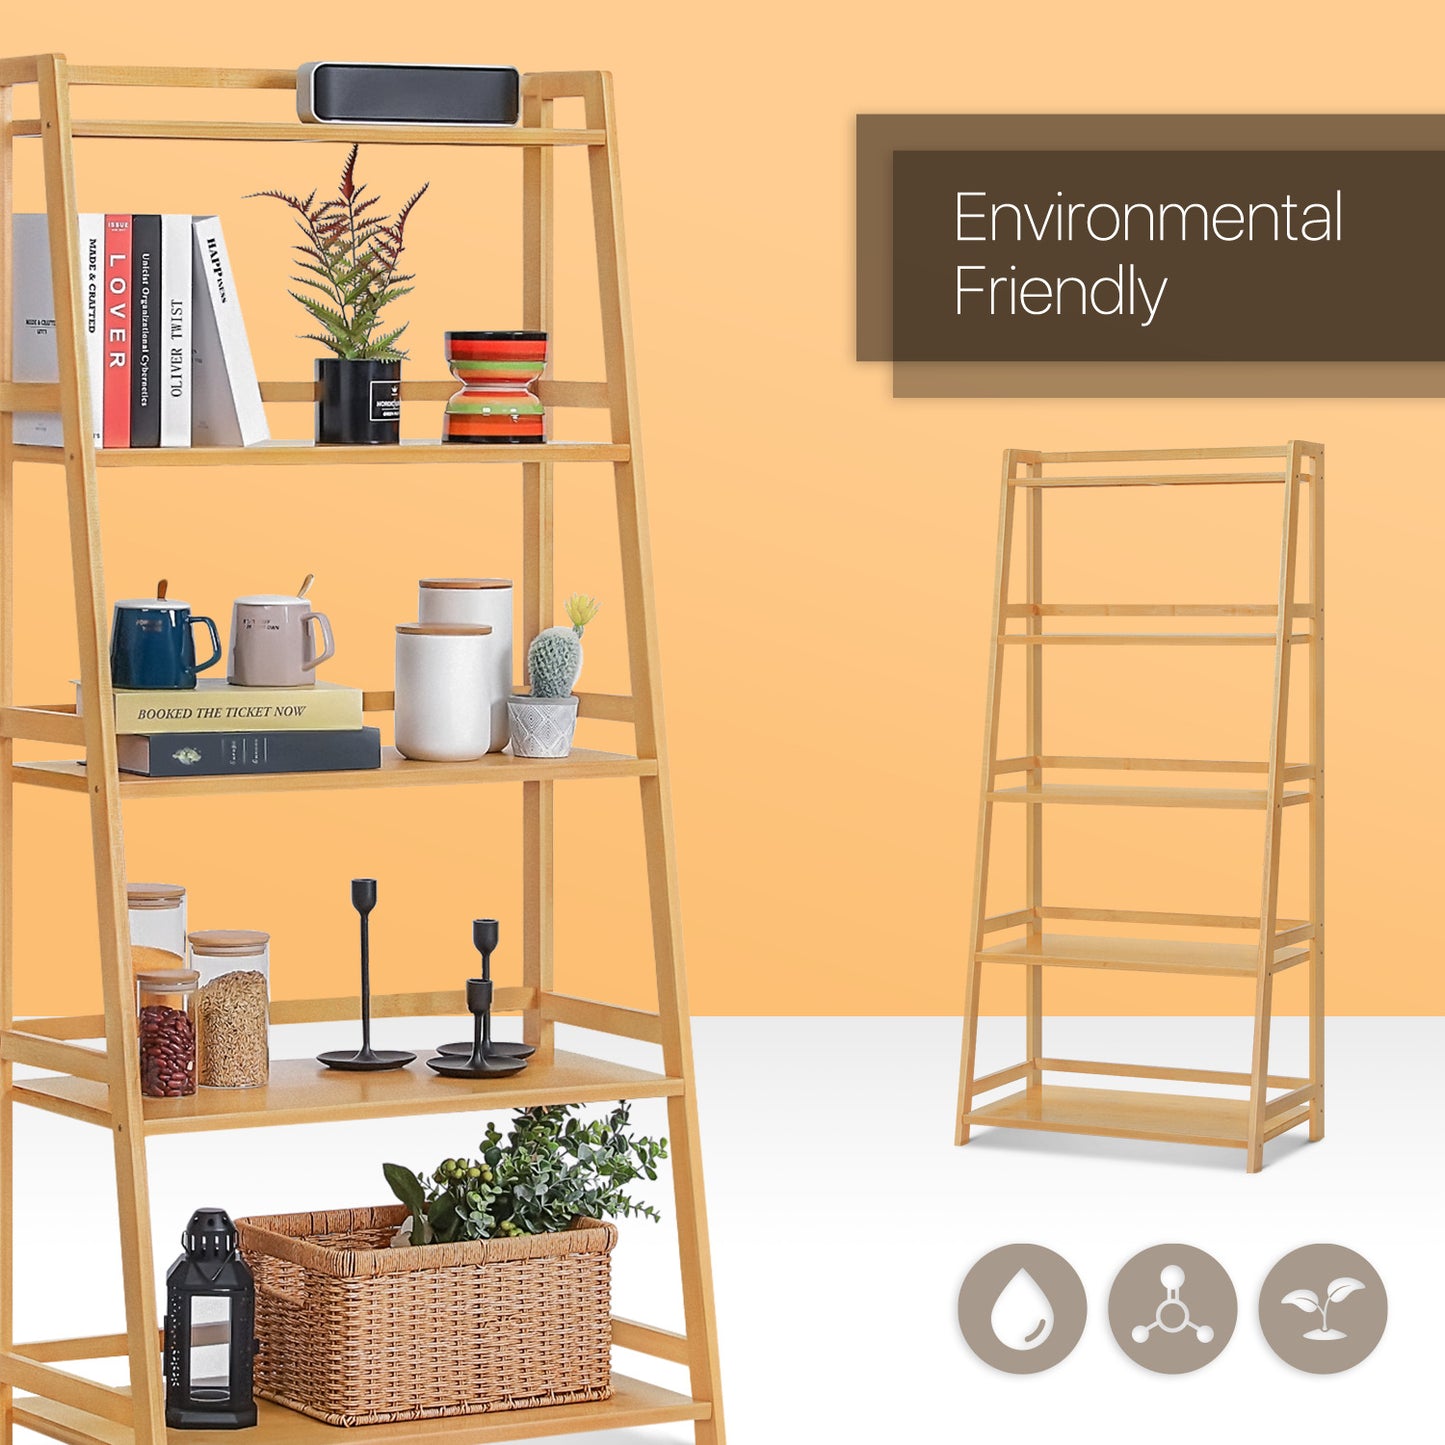 Adjustable Trapezoid Stand Alone Multi-Functional Shelf - 5 Tier - Natural